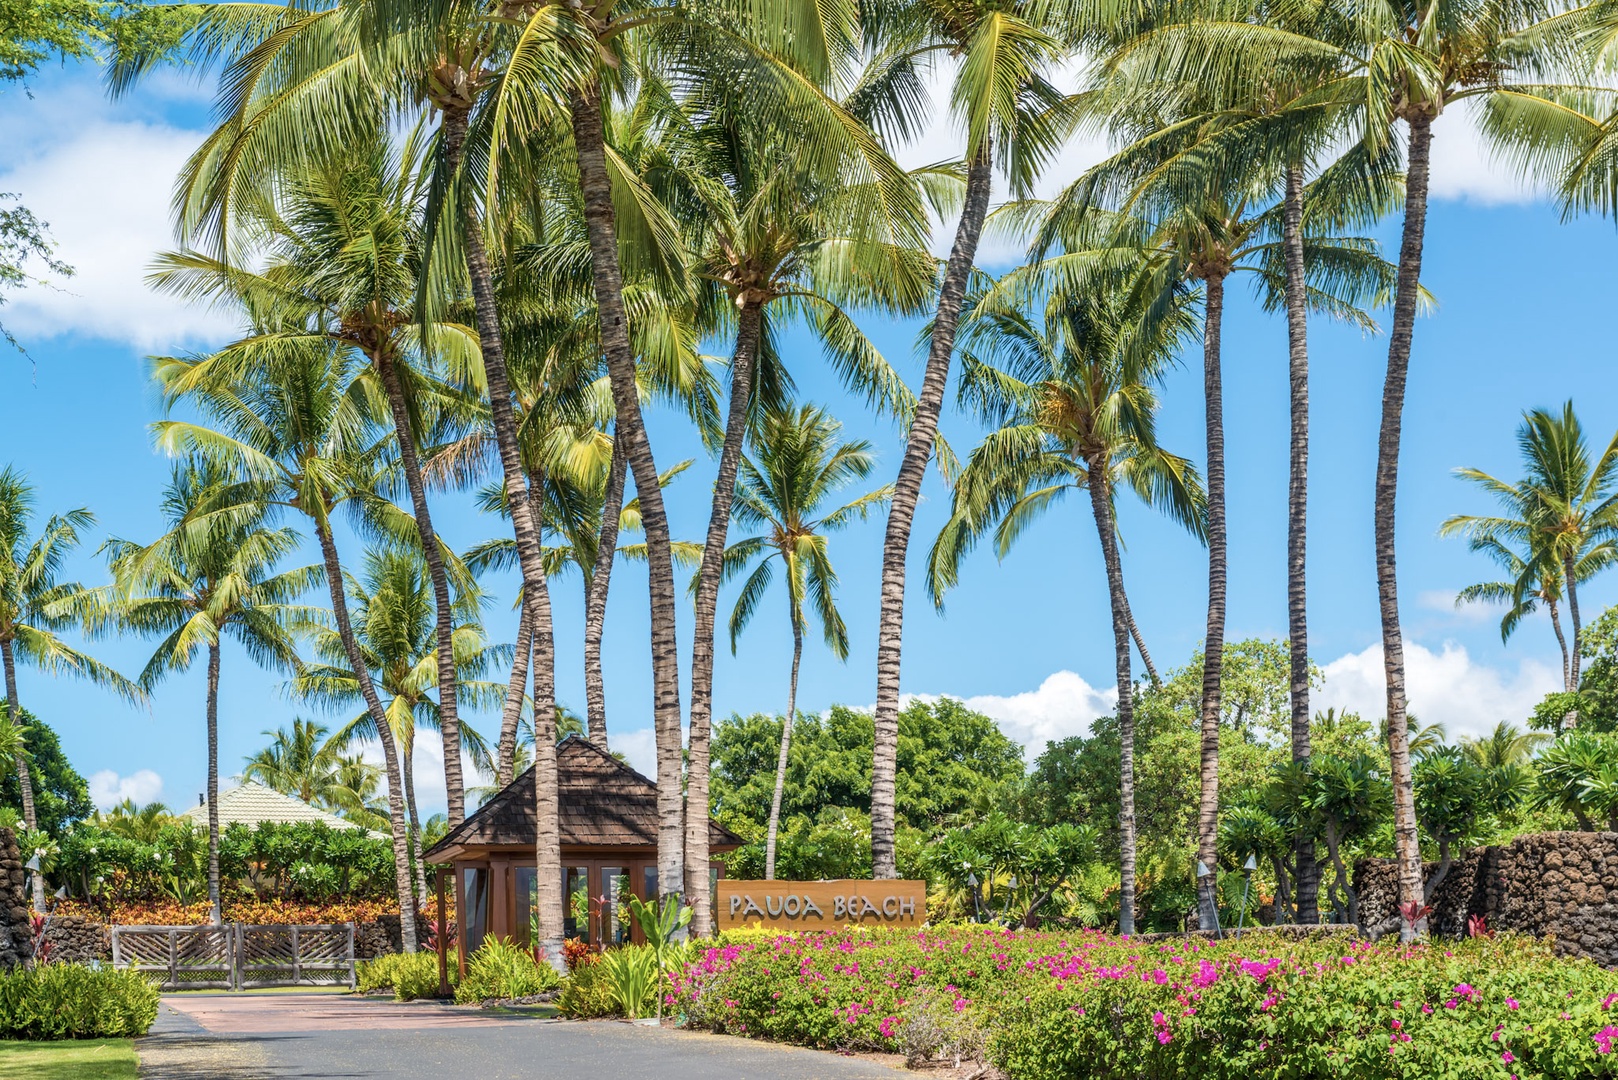 Kamuela Vacation Rentals, 3BD Na Hale 3 at Pauoa Beach Club at Mauna Lani Resort - Tropical pathway lined with palm trees leading to the gazebo.